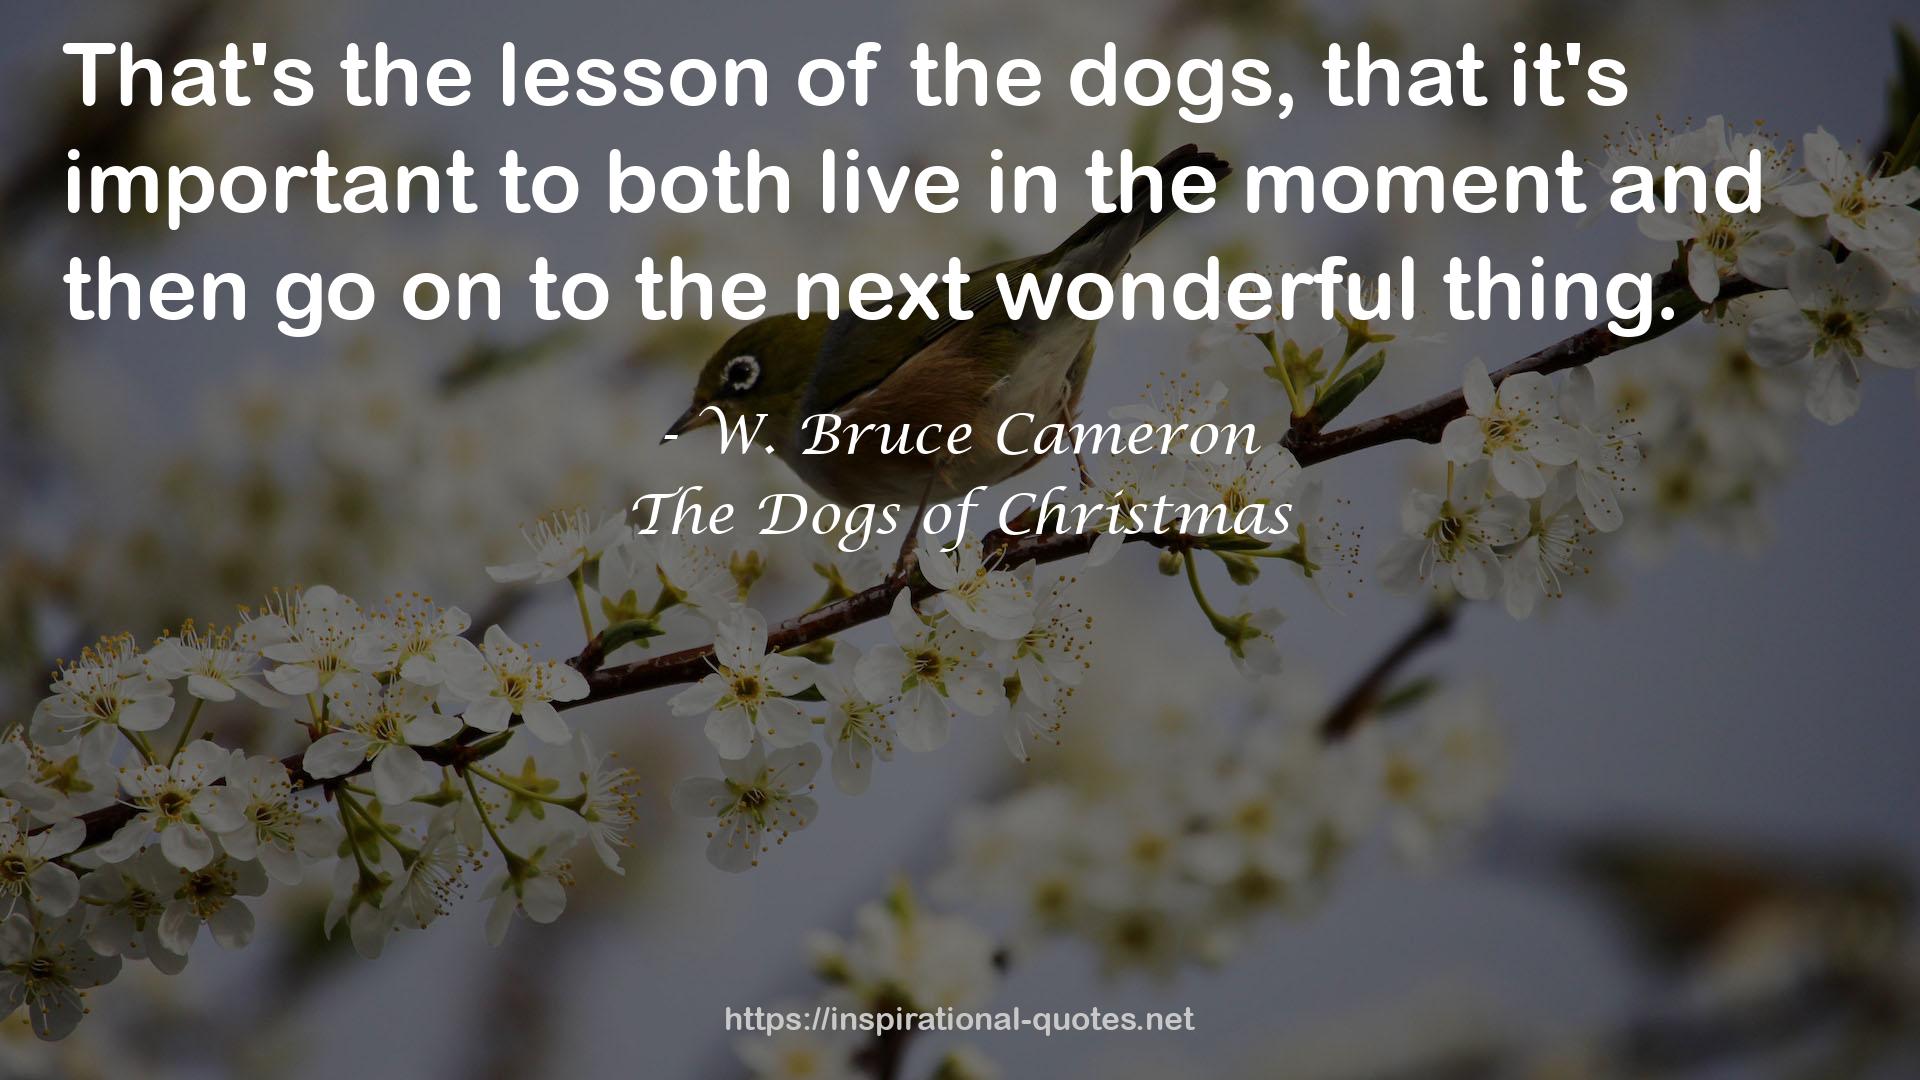 The Dogs of Christmas QUOTES